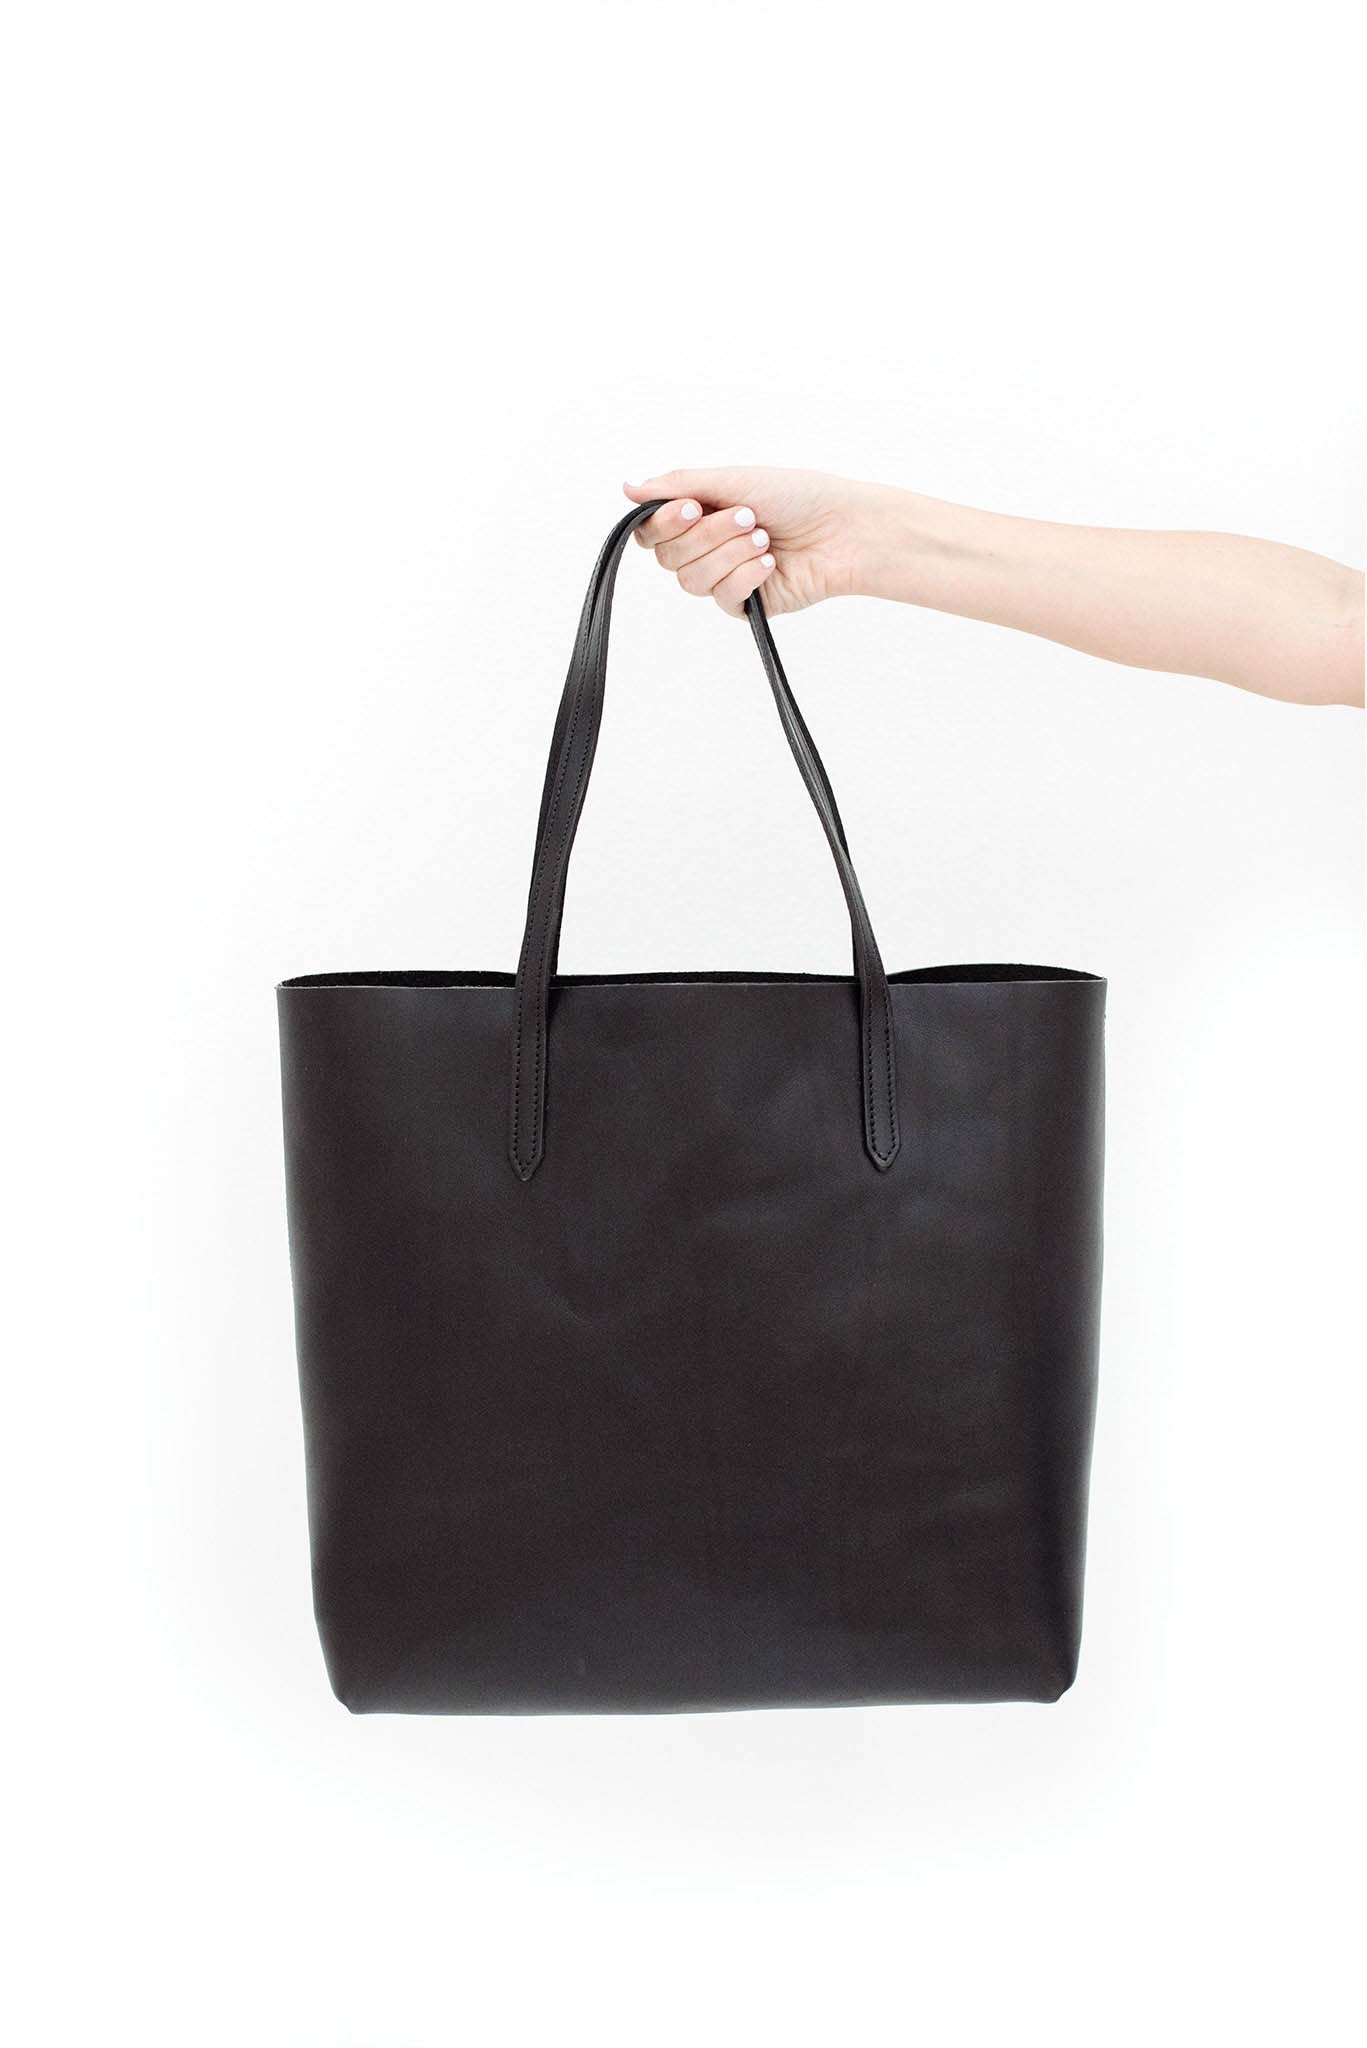 FOTO | The Highland Leather Tote - Black - a genuine leather tote in black vegetable tanned leather can be personalized with gold foil initials, making it the perfect personalized gift.